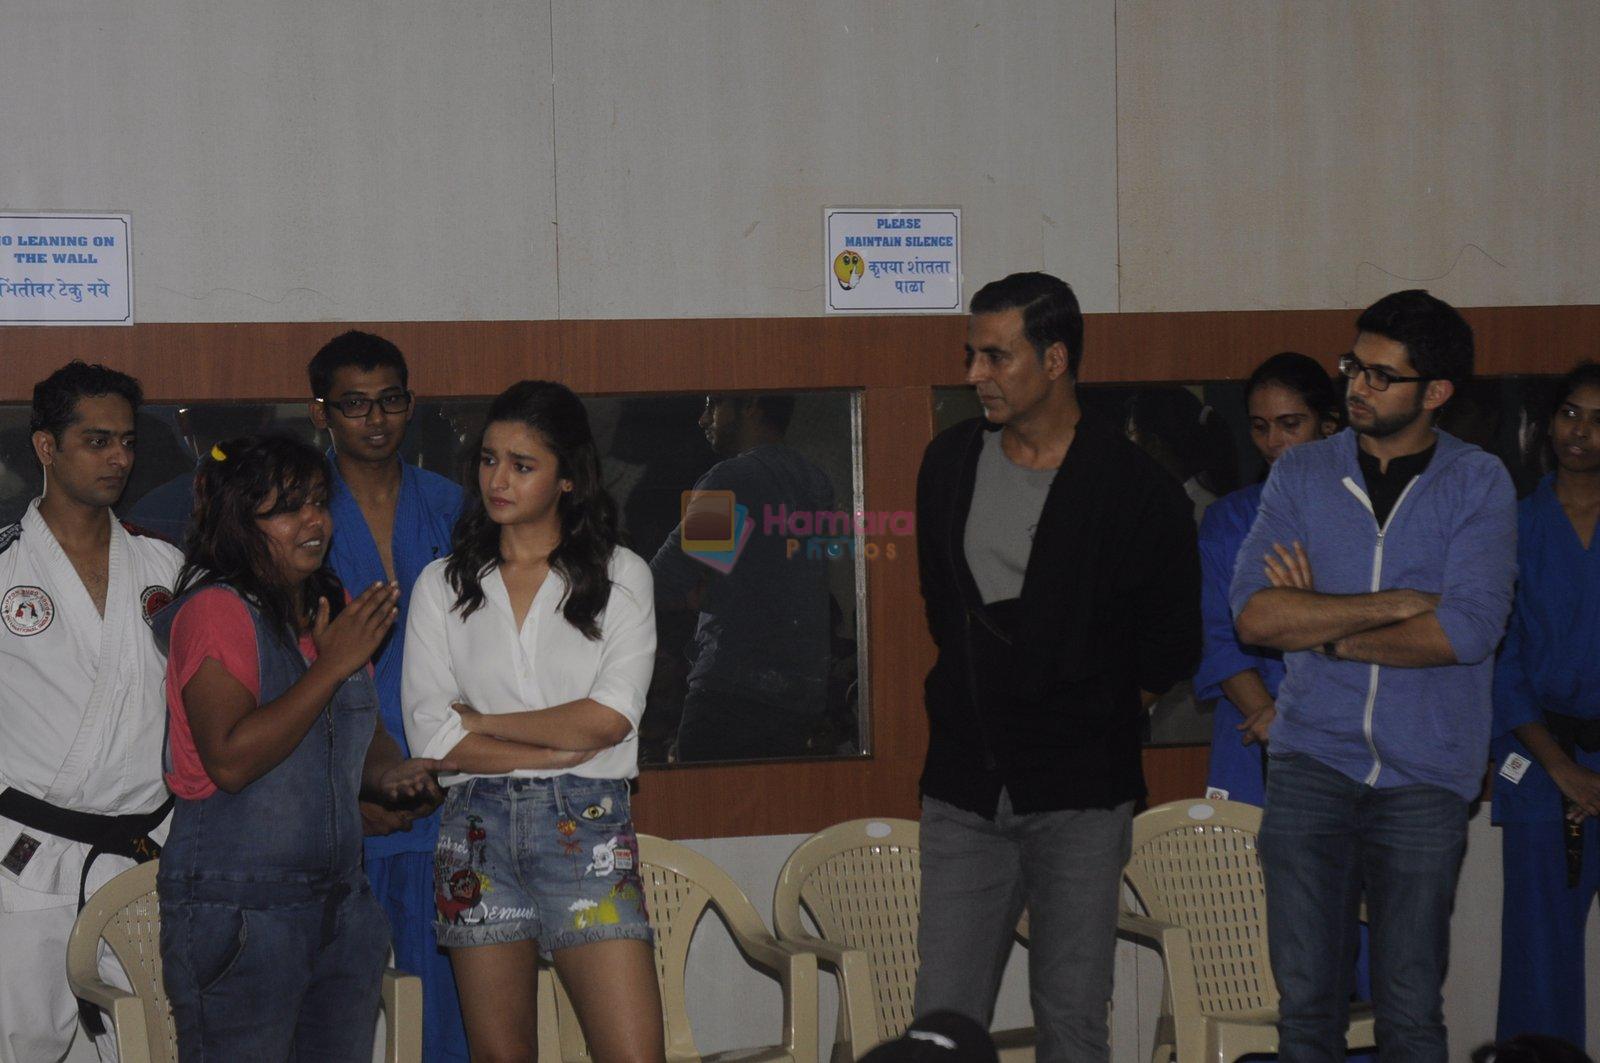 Alia Bhatt and Akshay Kumar for prize distribution for female martial arts for self defense course on 2nd Oct 2016